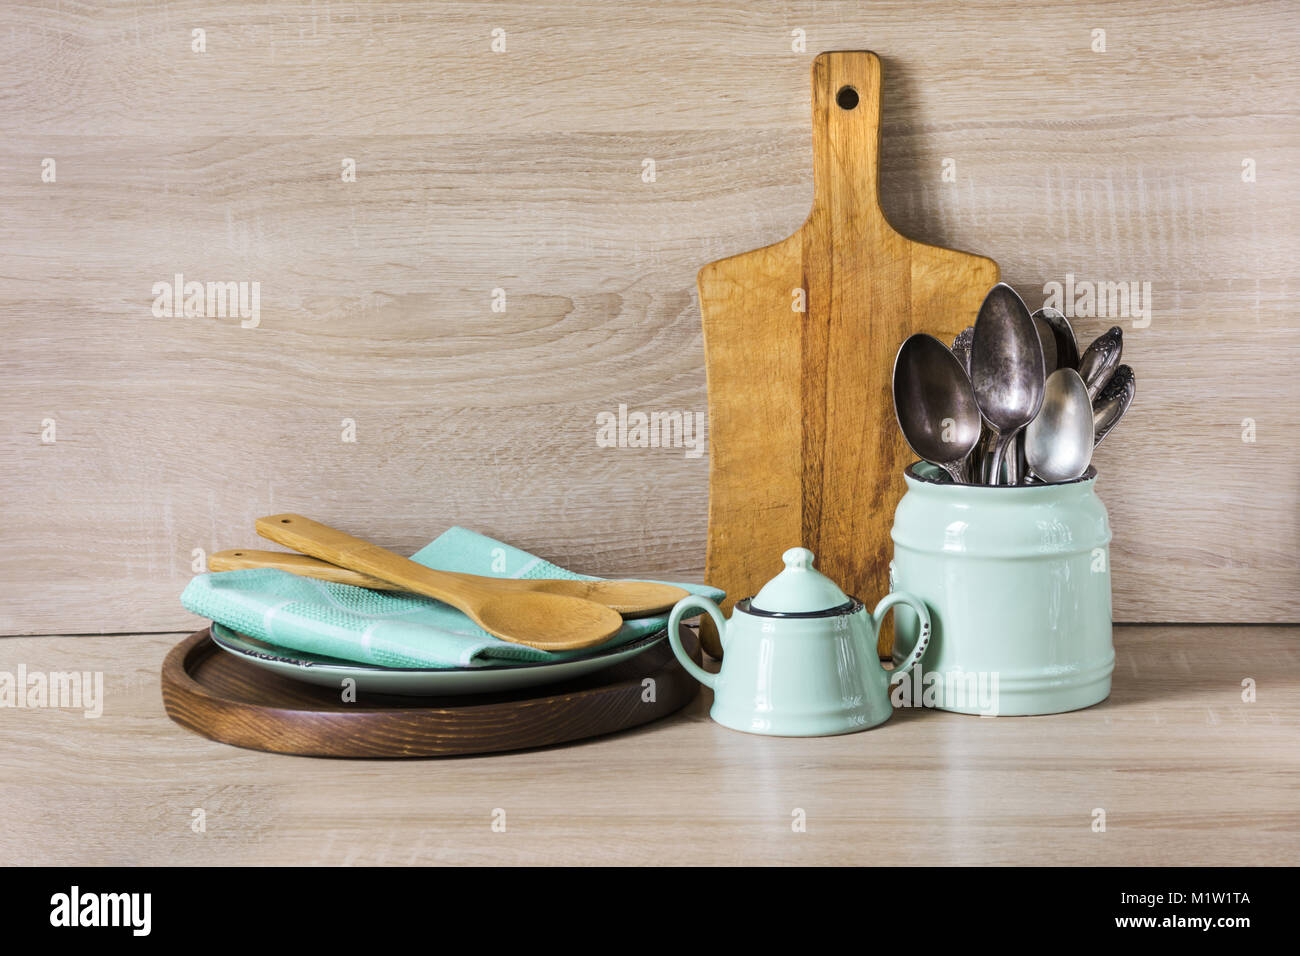 Turquoise and wooden vintage crockery, tableware, dishware utensils and stuff on wooden table-top. Kitchen still life as background for design. Image  Stock Photo